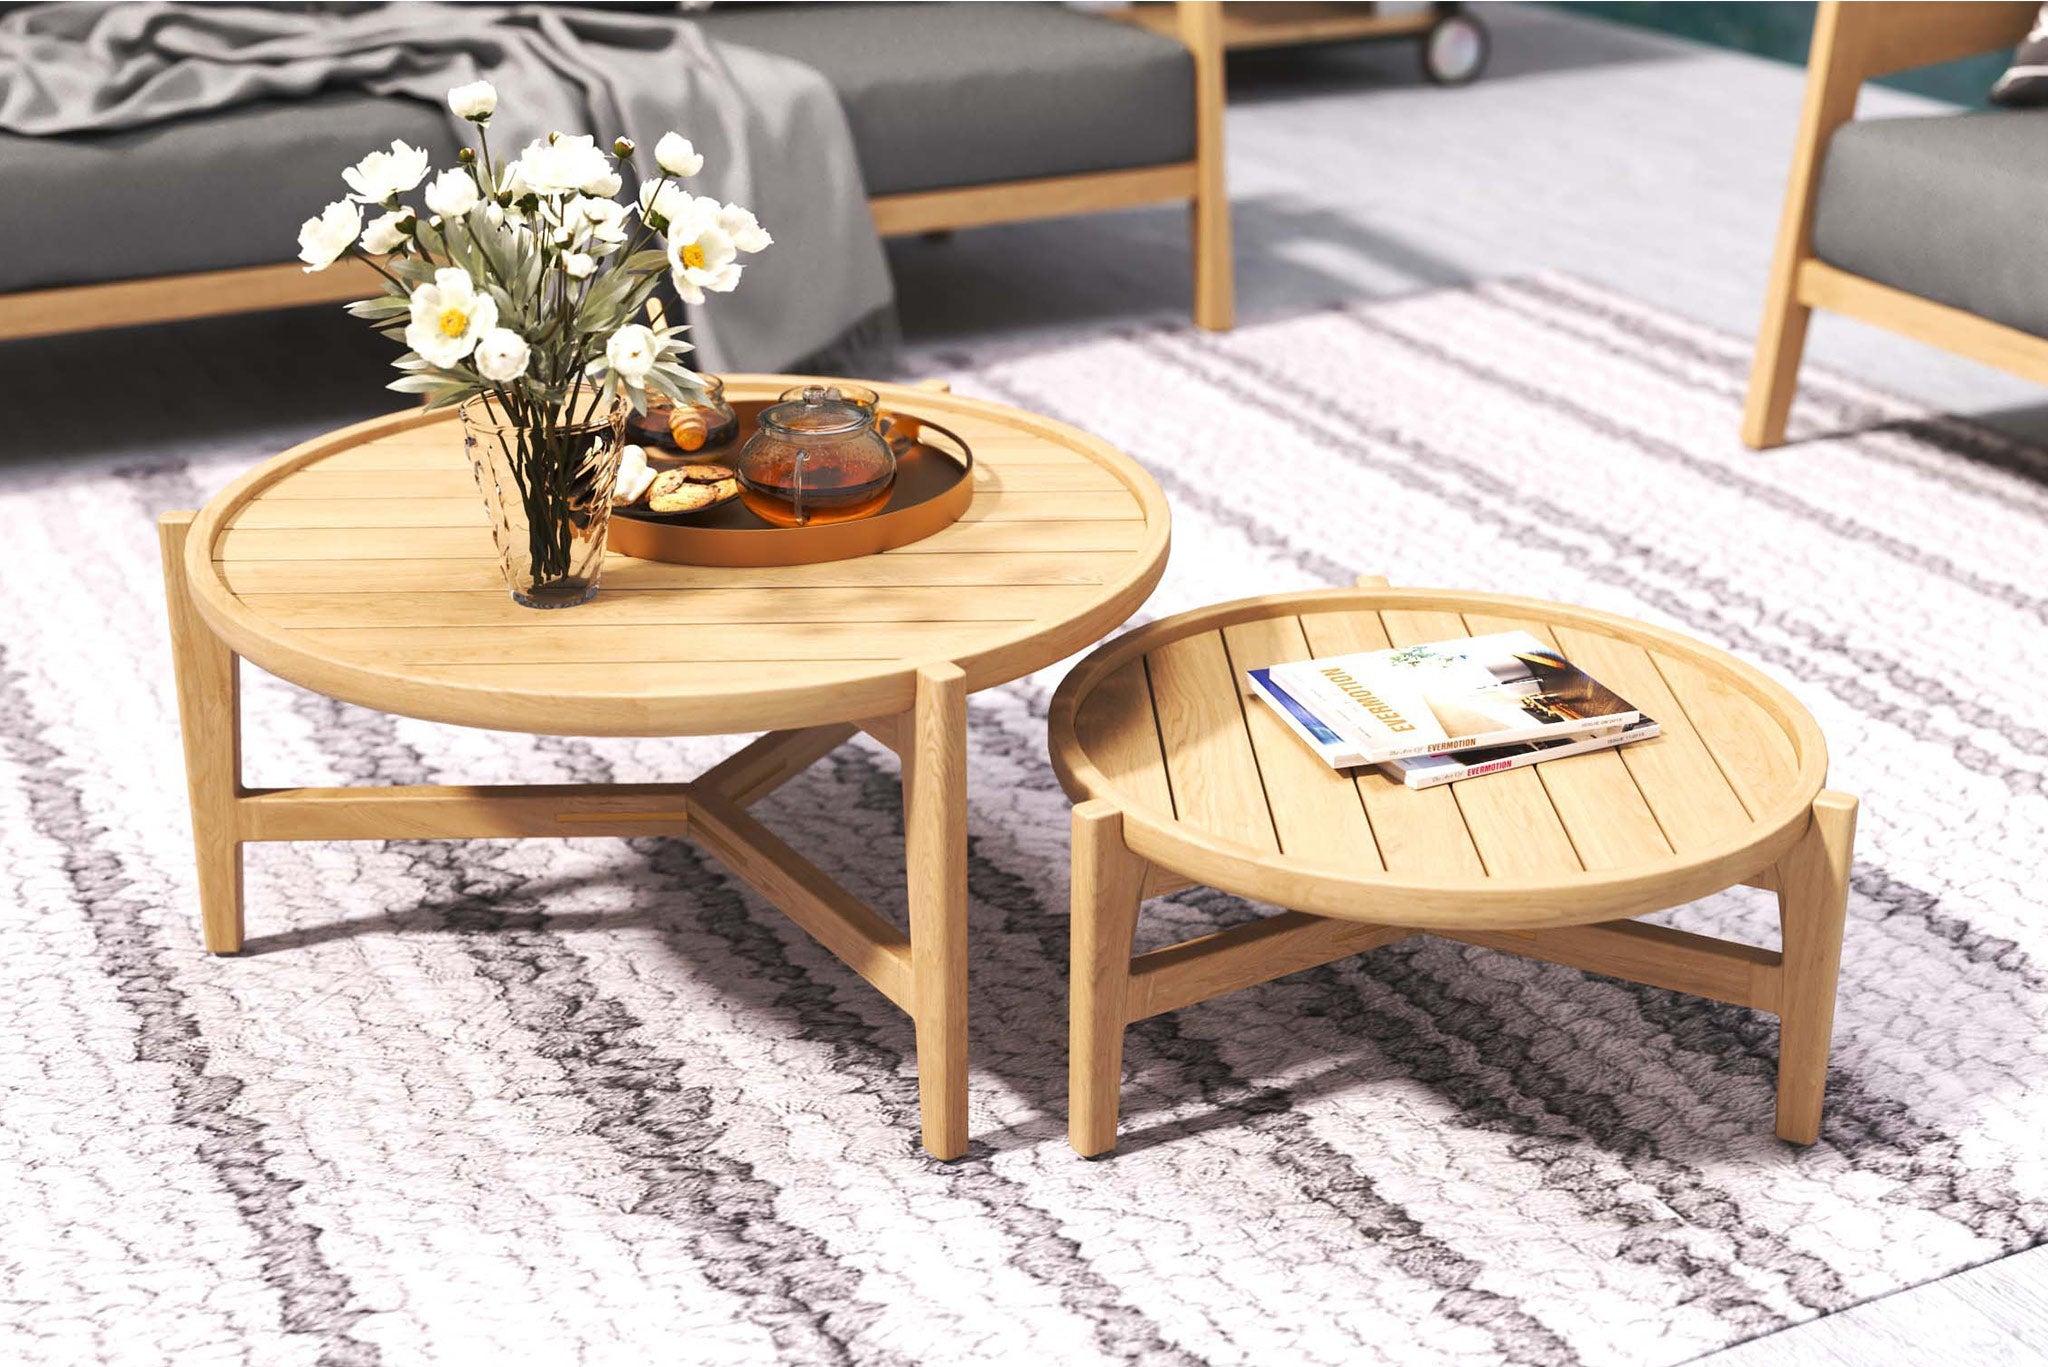 Top Tips For Mastering Round Coffee Table Styling - Elsa Home And Beauty